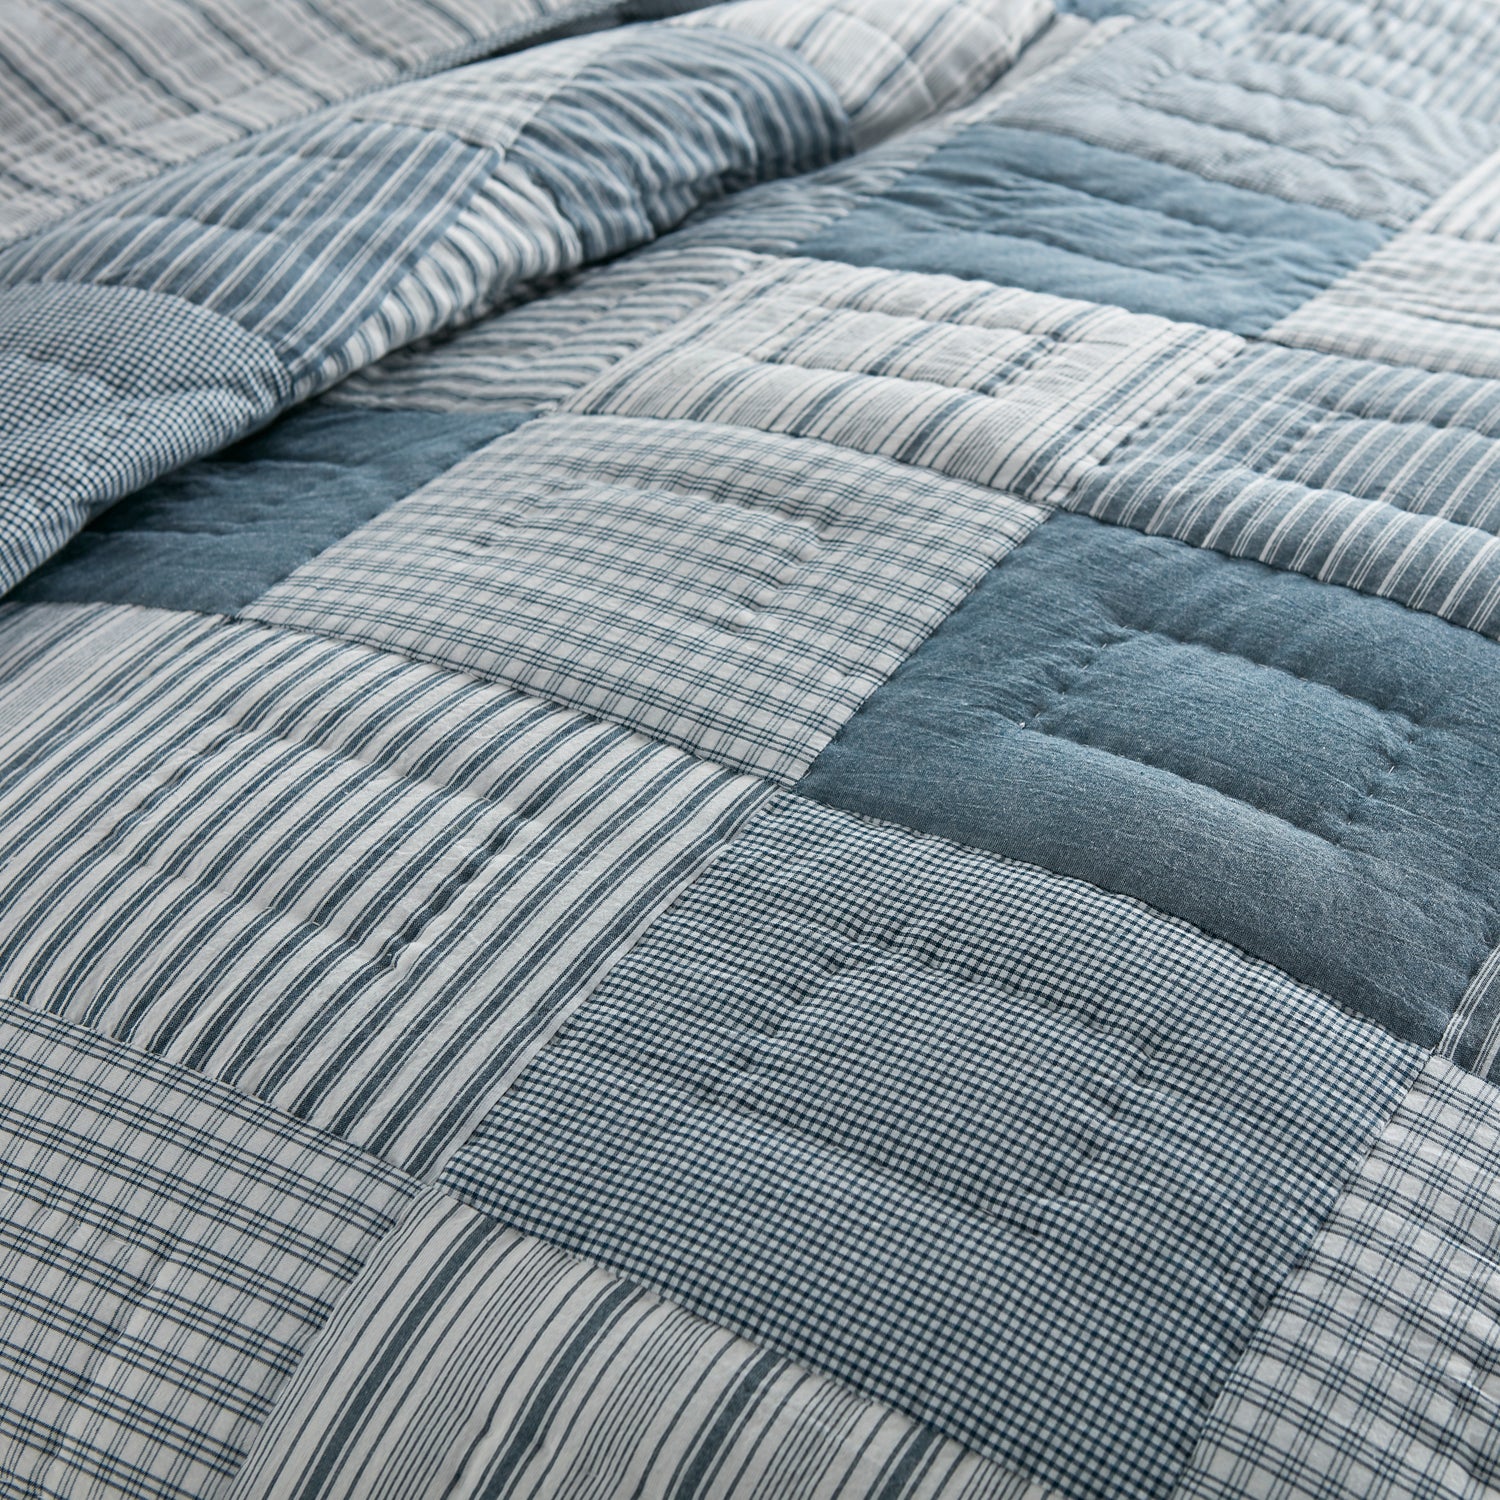 51896-Sawyer-Mill-Blue-Queen-Quilt-90Wx90L-image-8